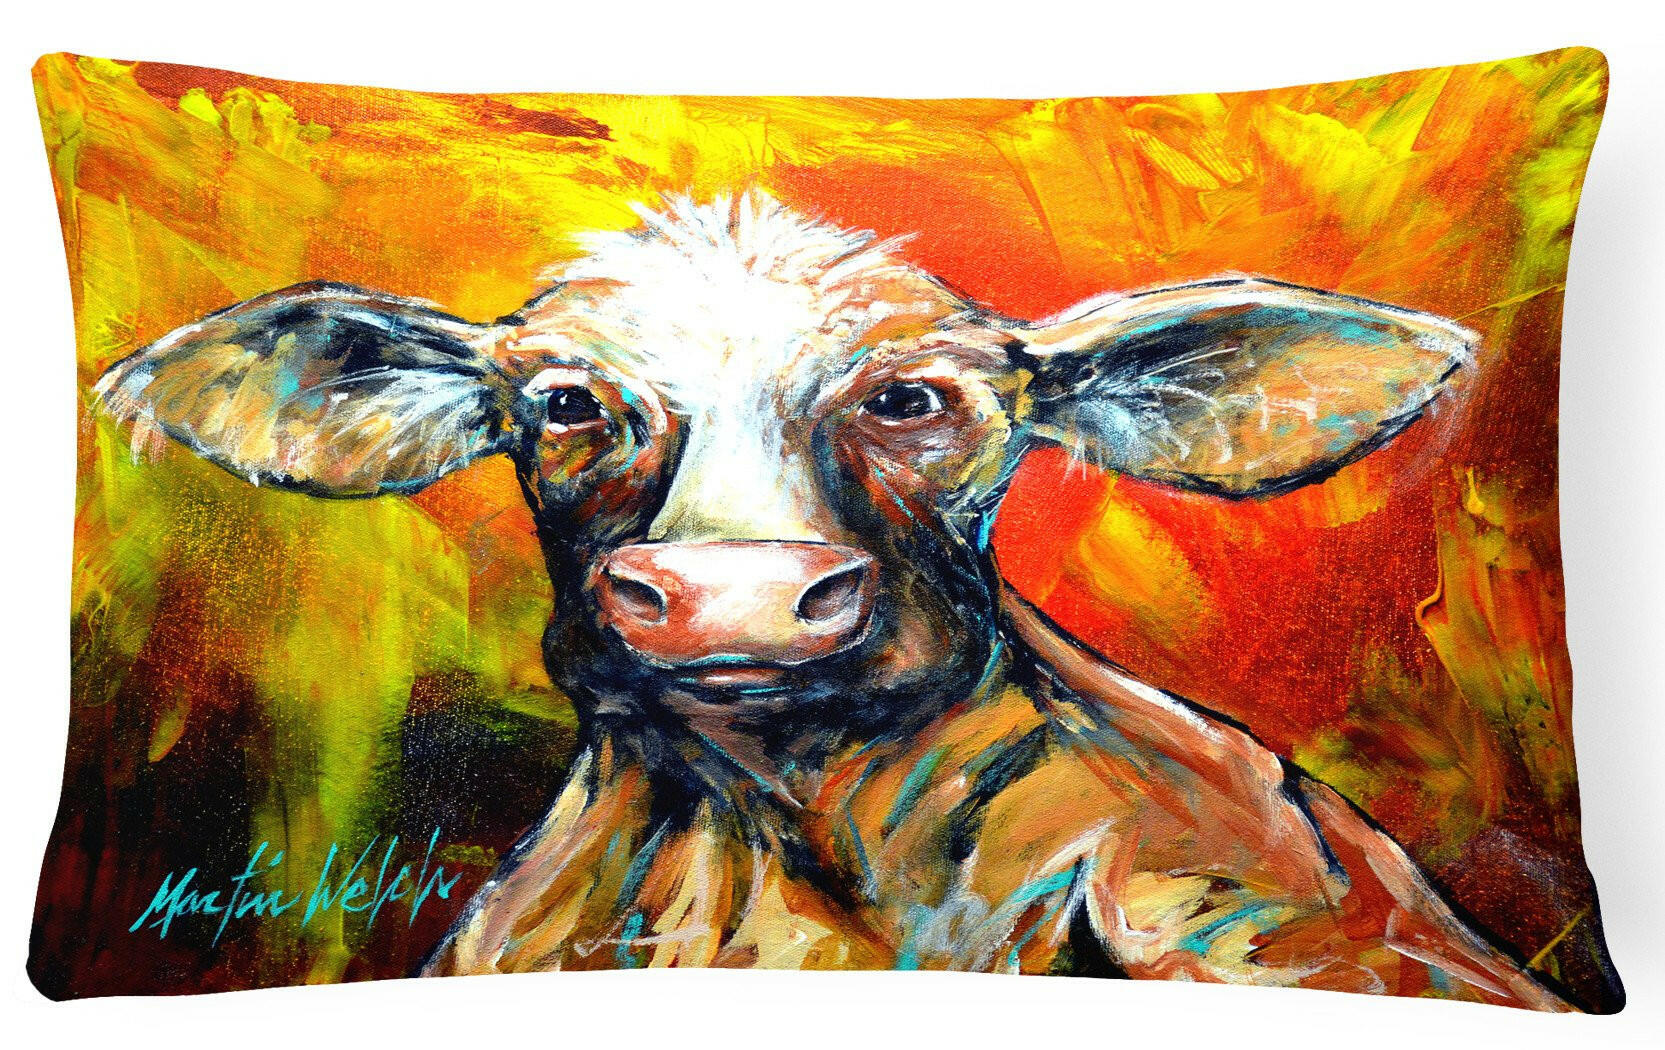 Another Happy Cow Fabric Decorative Pillow MW1225PW1216 by Caroline's Treasures